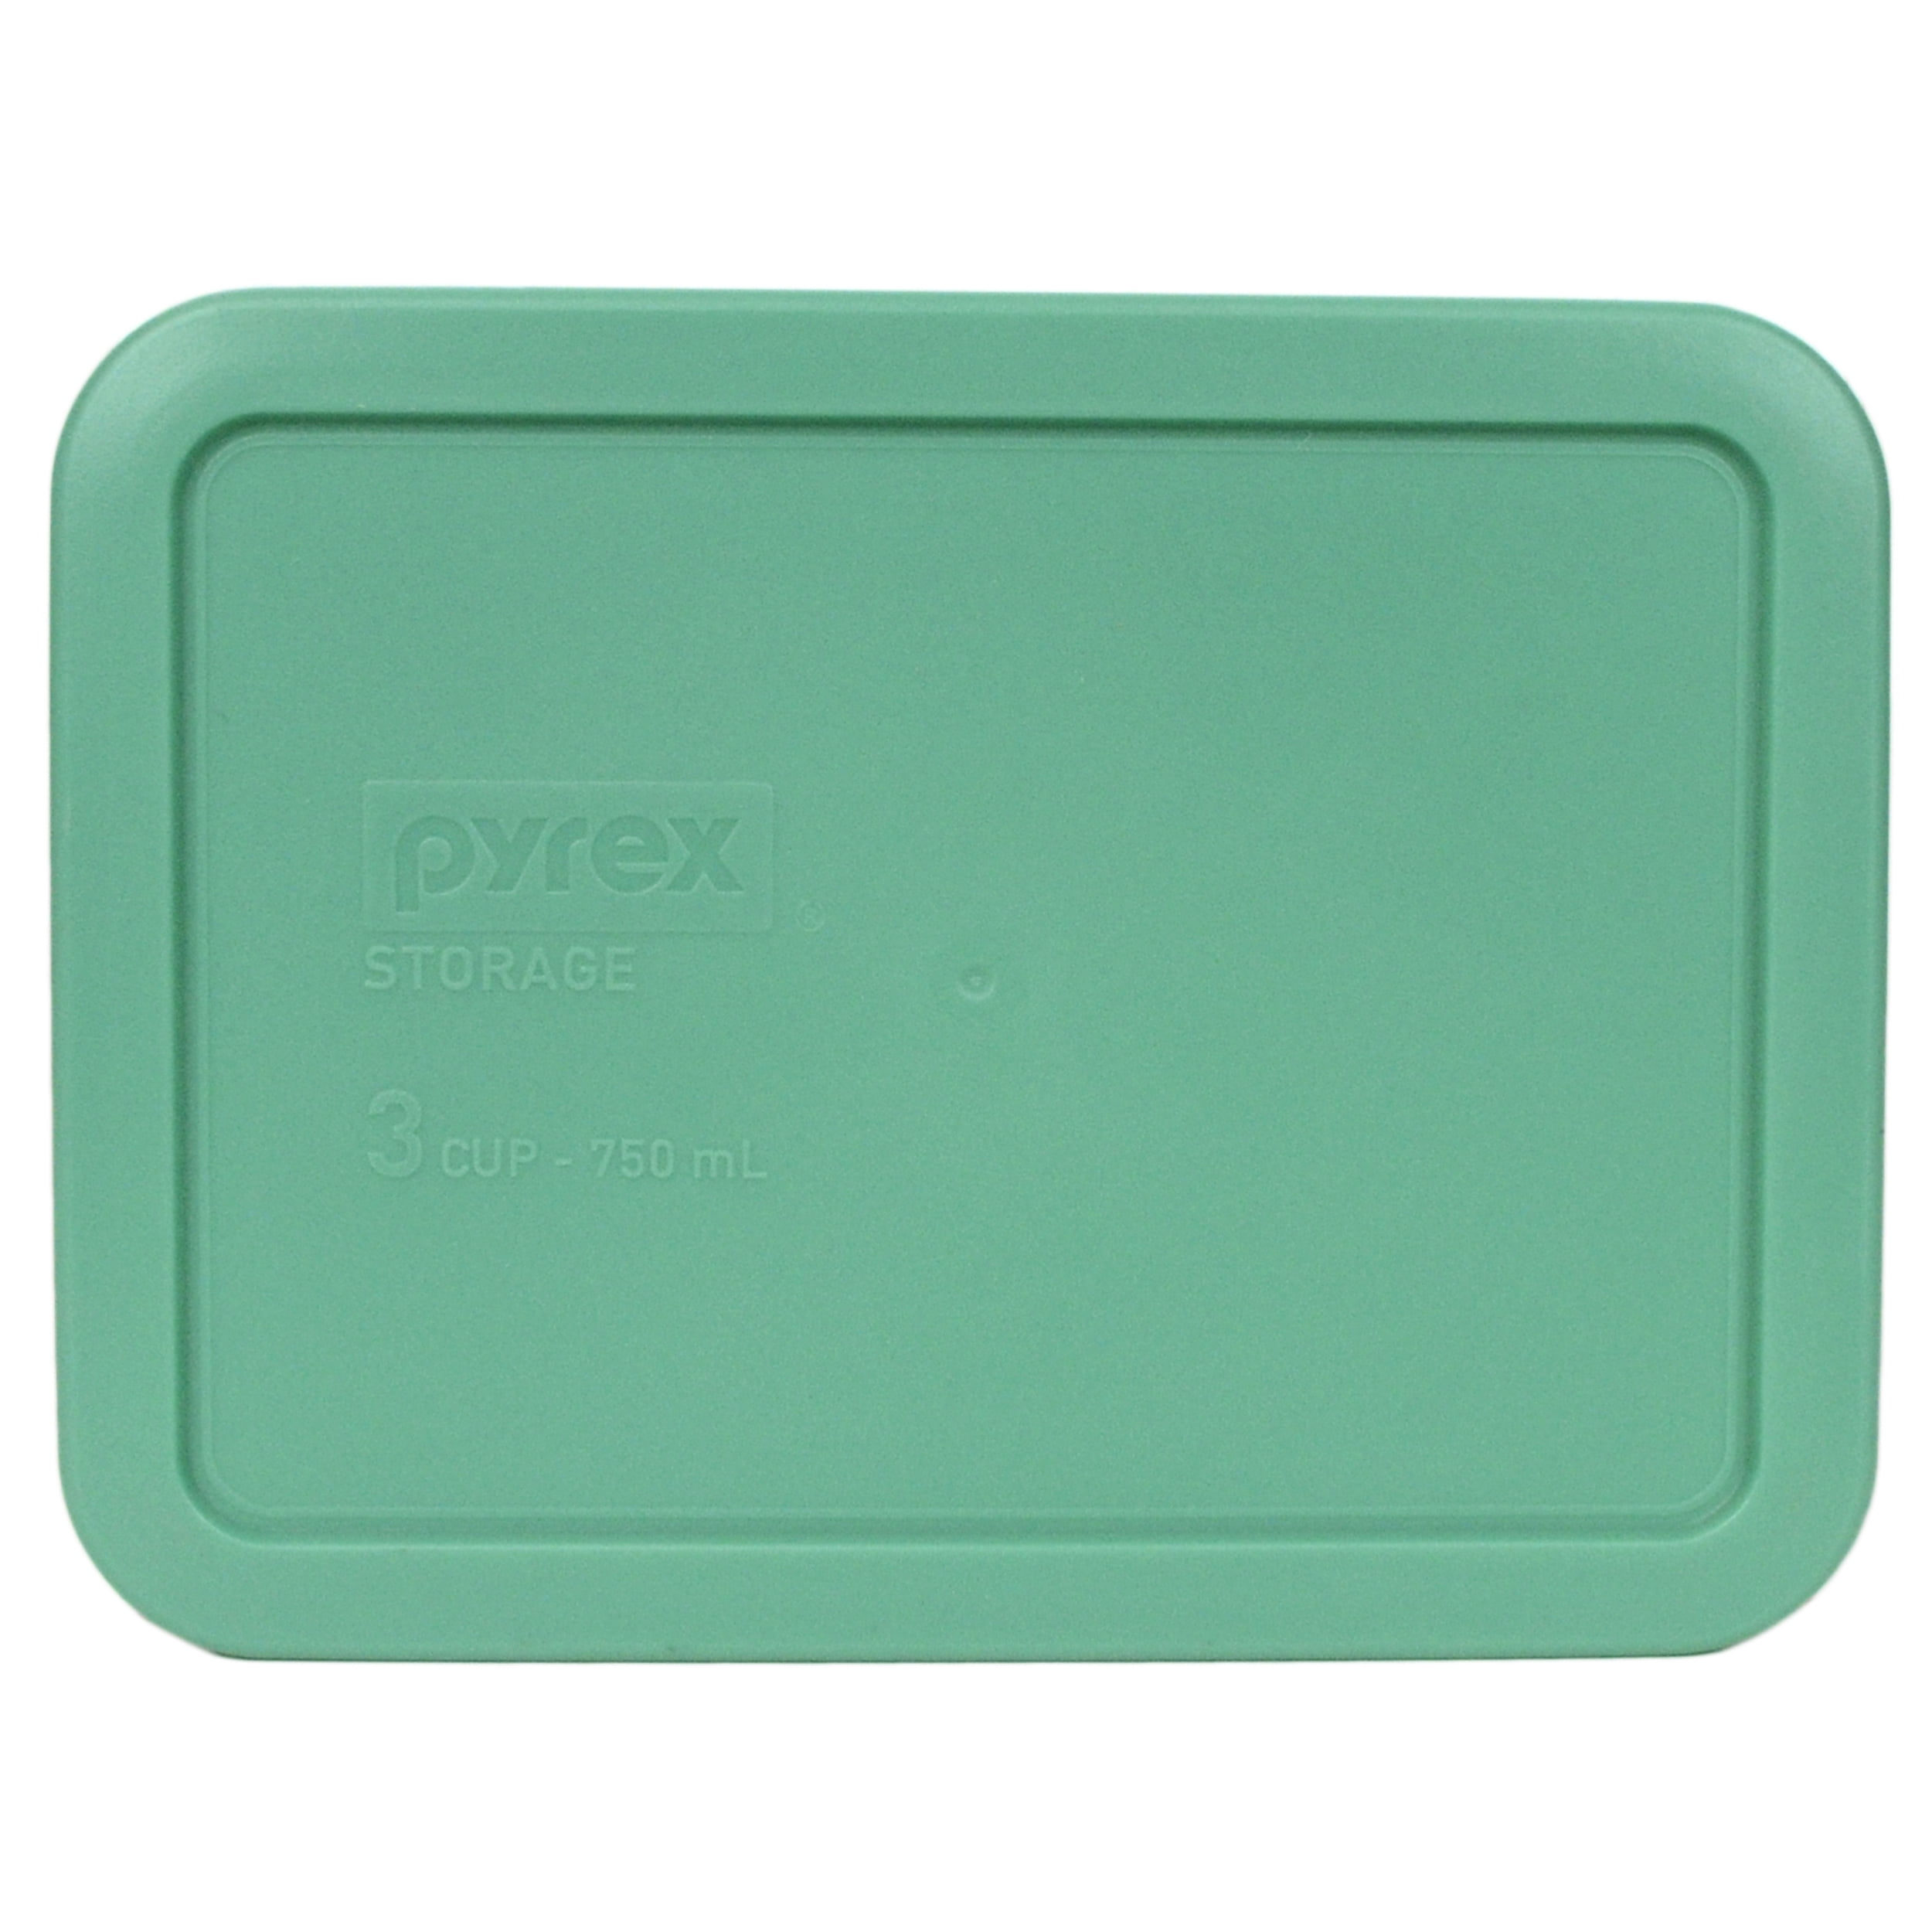 by Pyrex Pyrex 7210-PC Rectangle 3 Cup Storage Lid for Glass Dish 2, Light Green